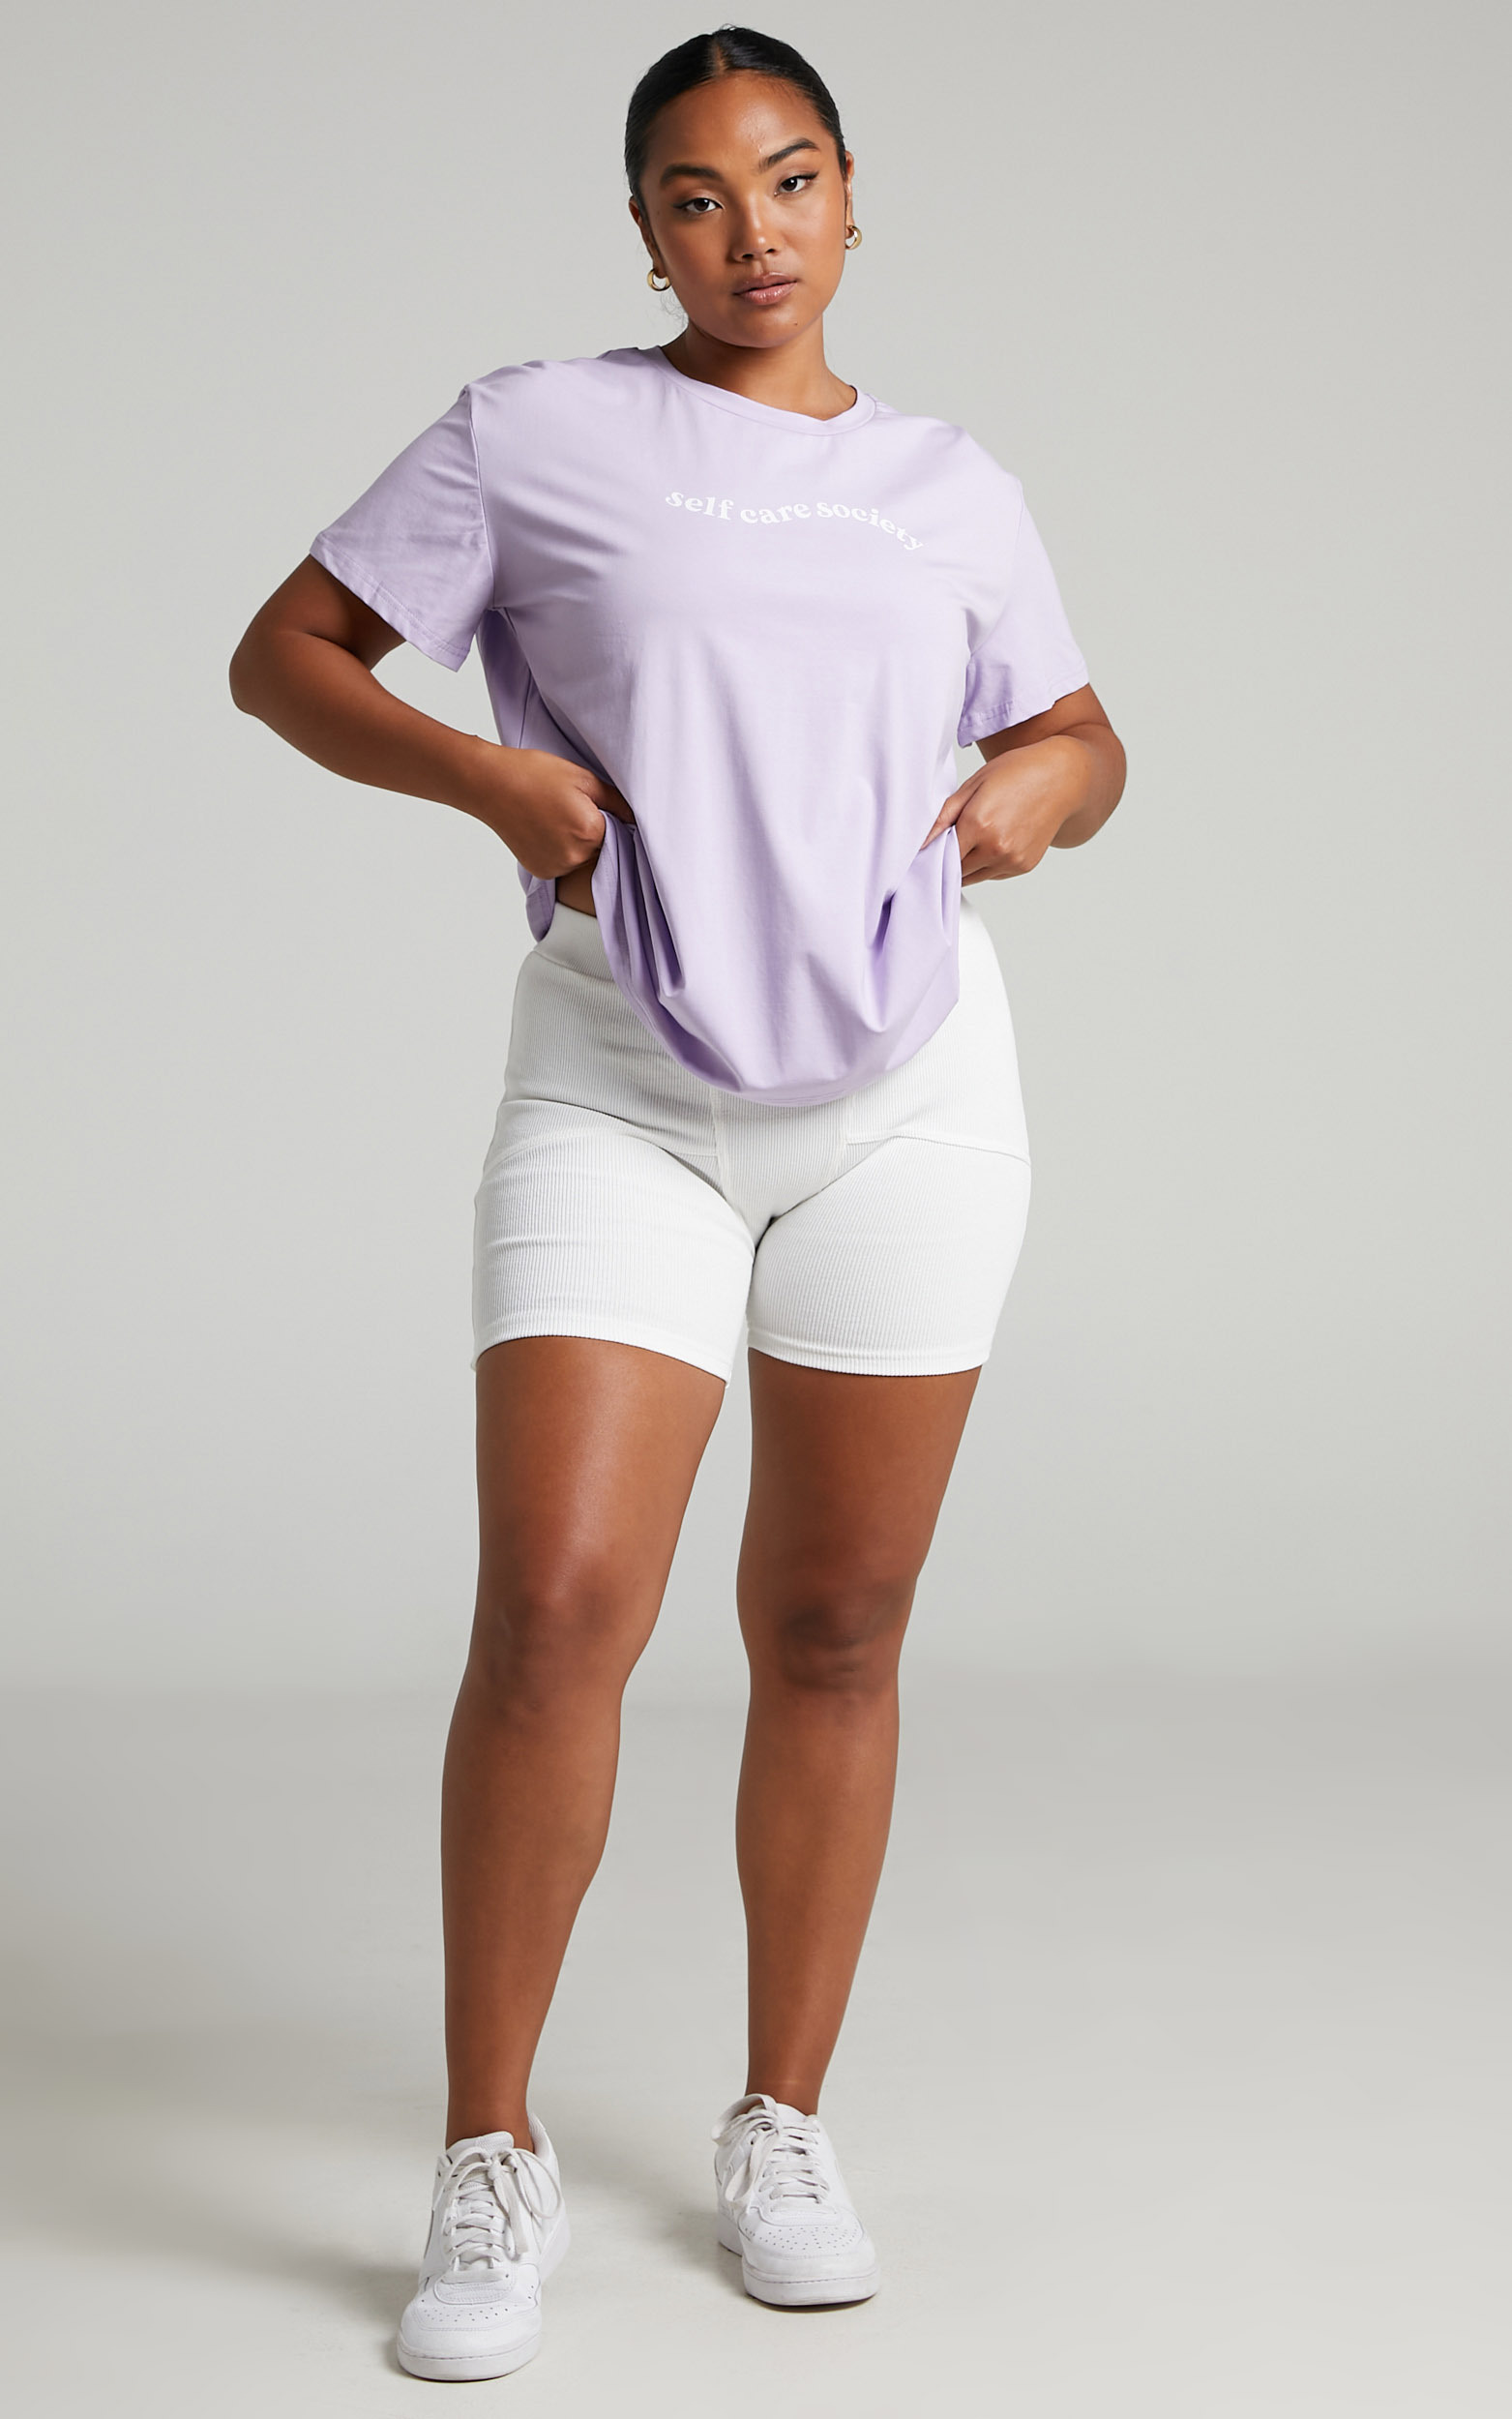 Sunday Society Club - Self Care Society T Shirt in Lilac - 04, PRP2, hi-res image number null